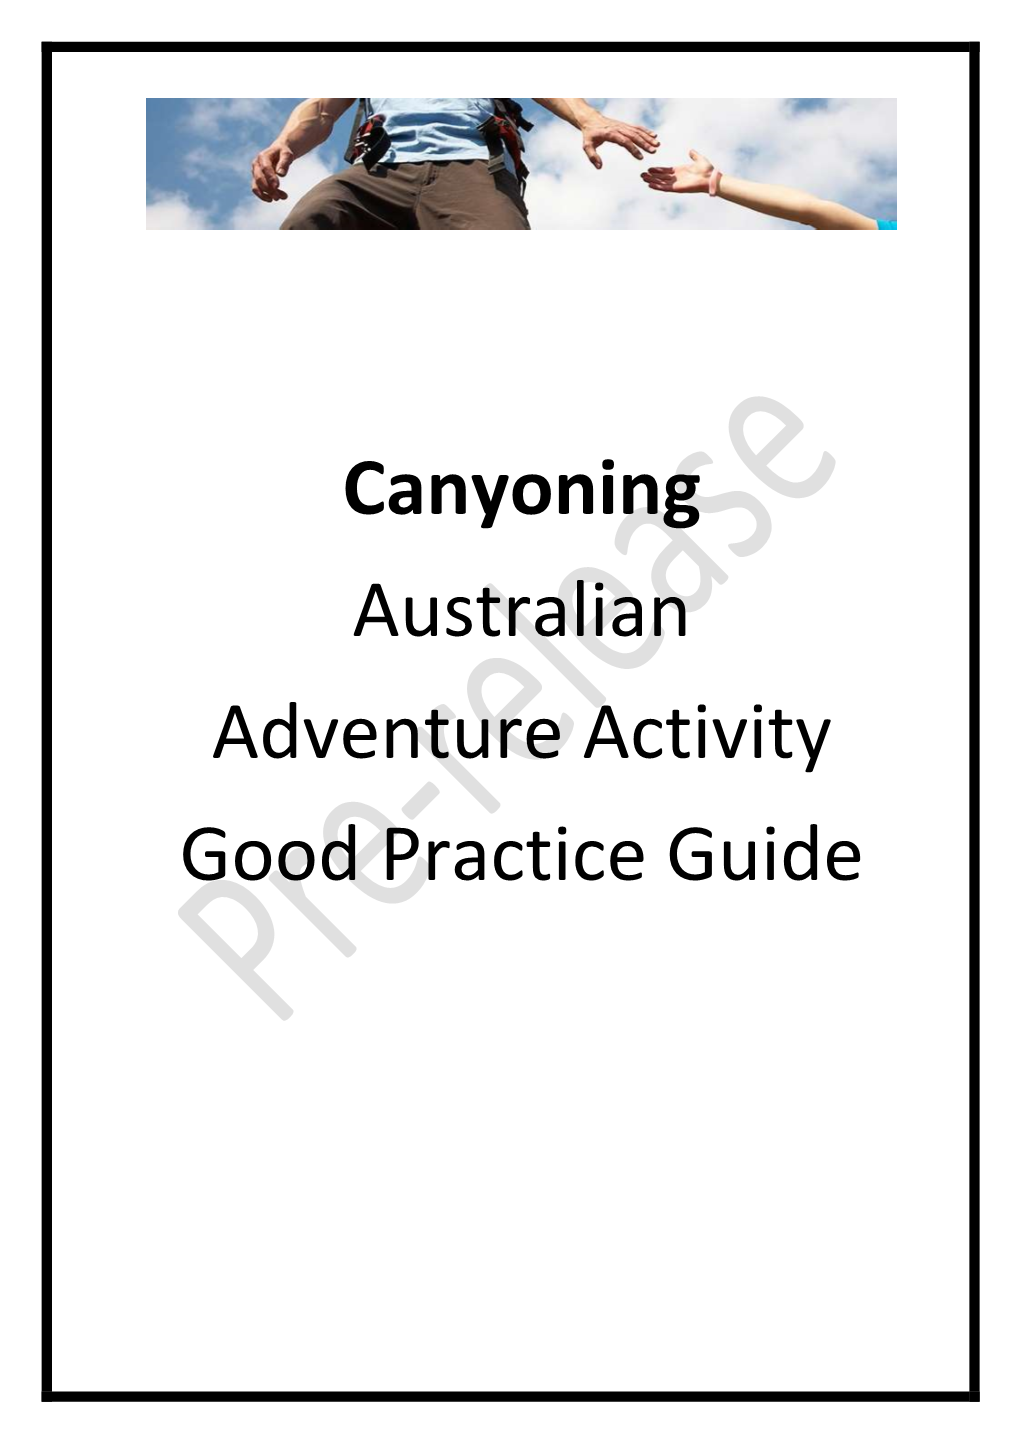 Canyoning Australian Adventure Activity Good Practice Guide Canyoning GPG Version 1.0